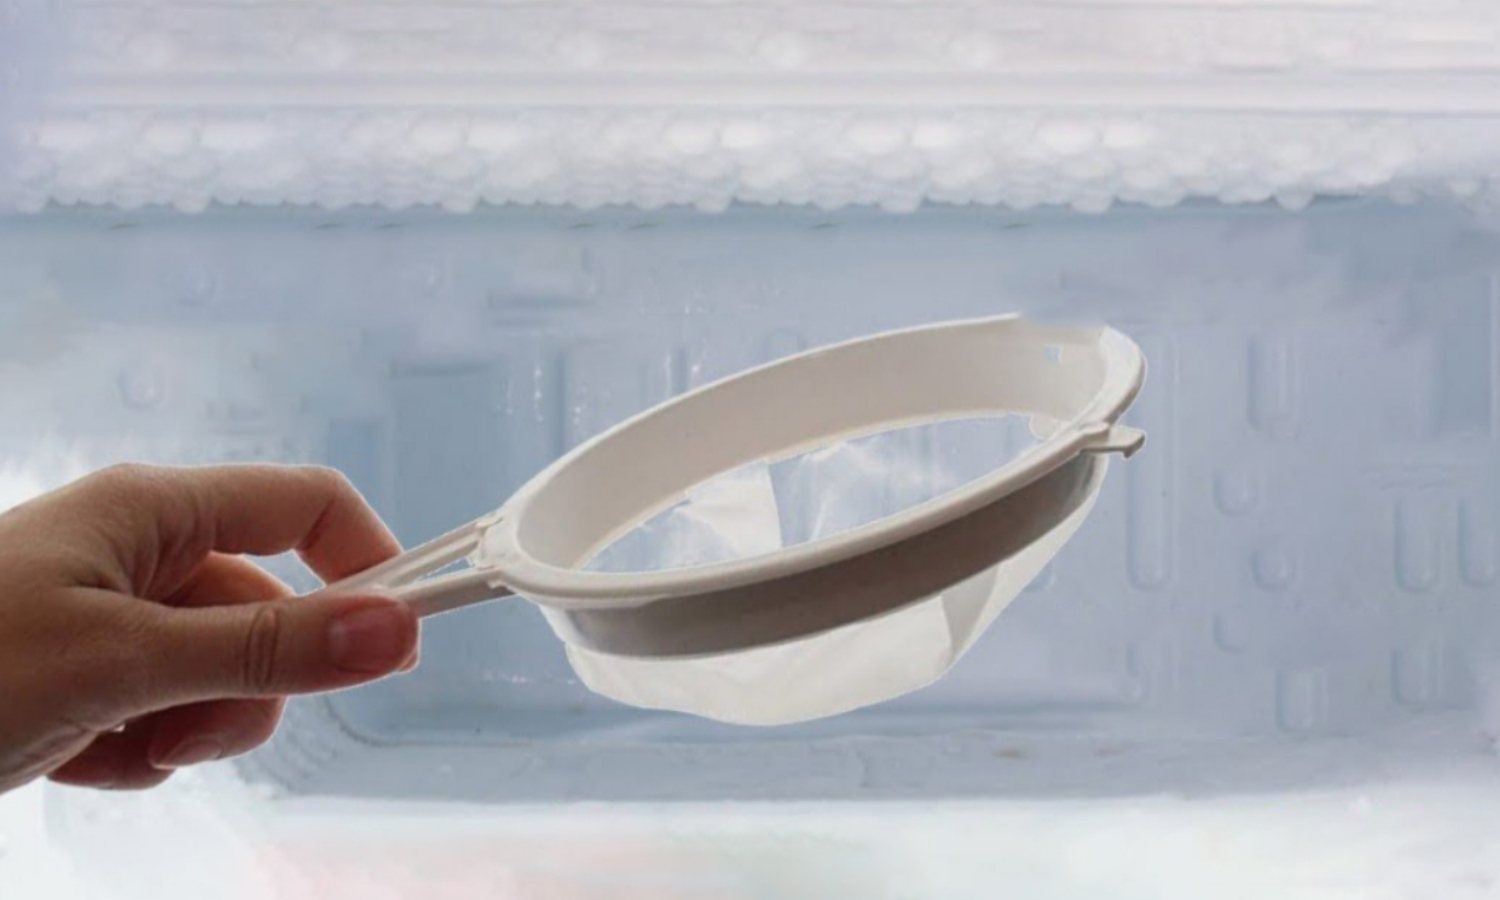 Place the strainer in the freezer tip